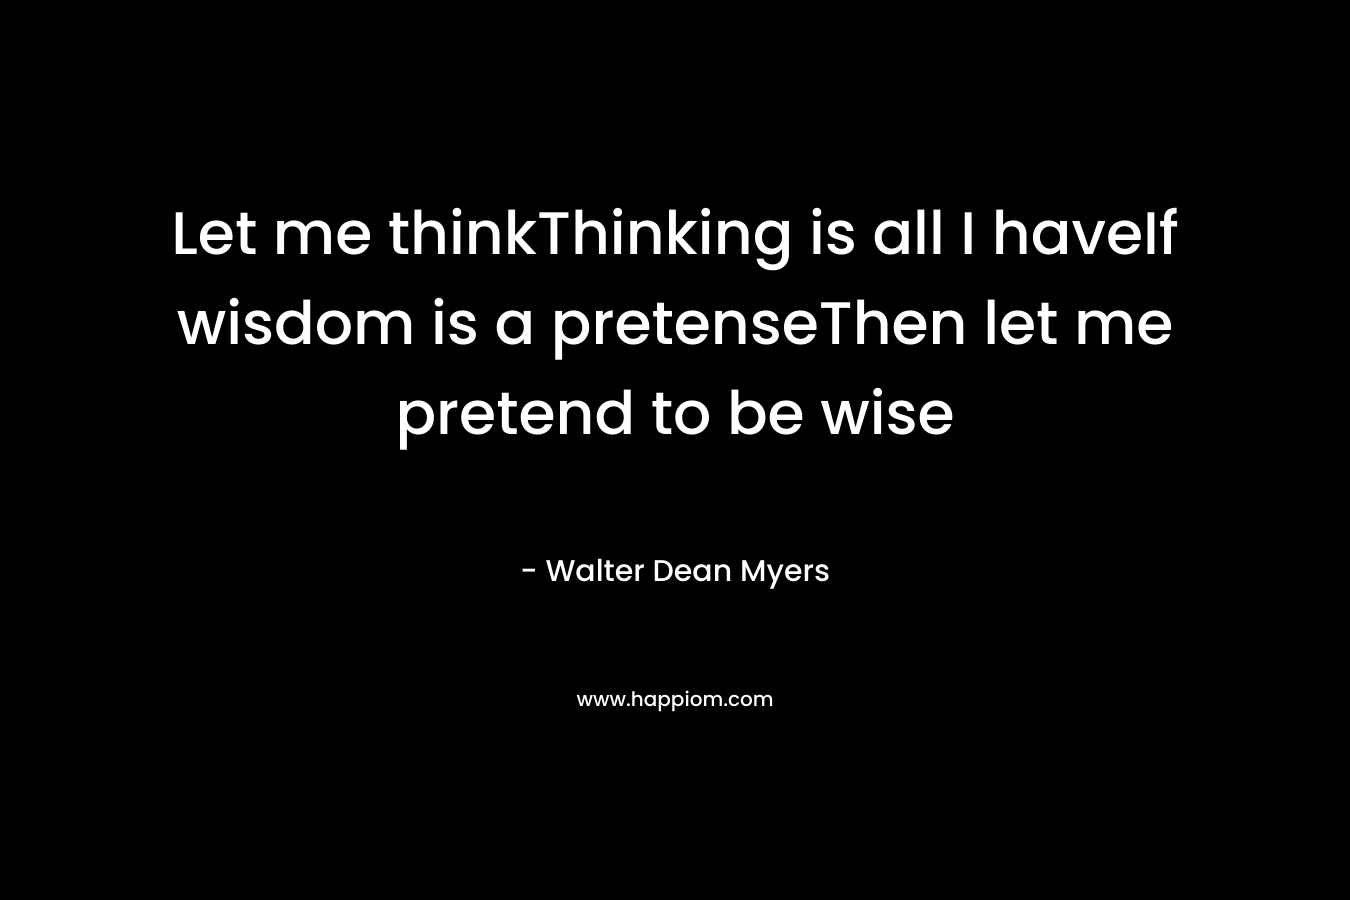 Let me thinkThinking is all I haveIf wisdom is a pretenseThen let me pretend to be wise